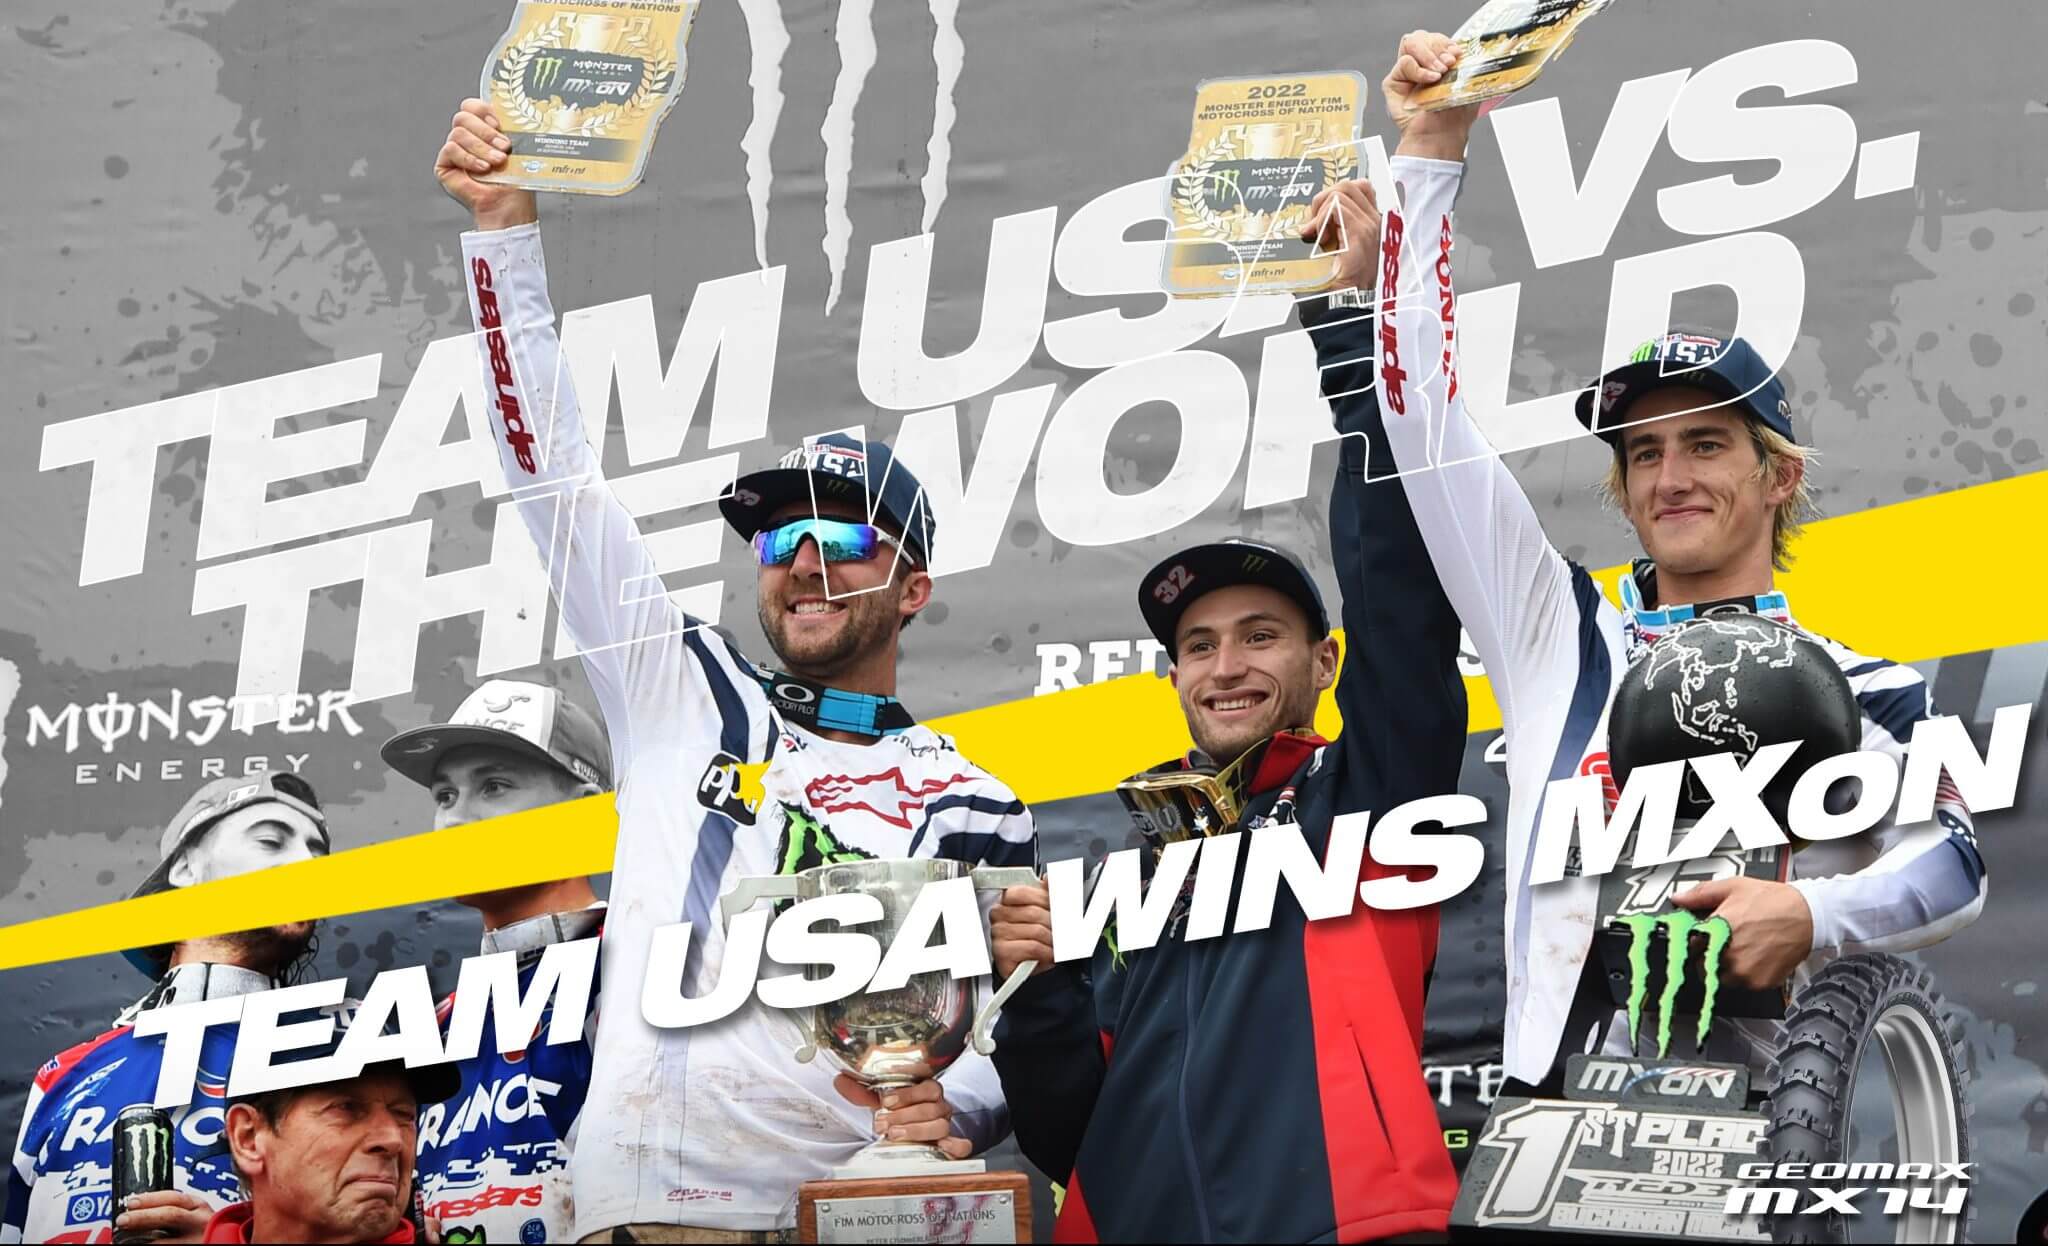 Team USA Wins 2022 Motocross of Nations! Dunlop Motorcycle